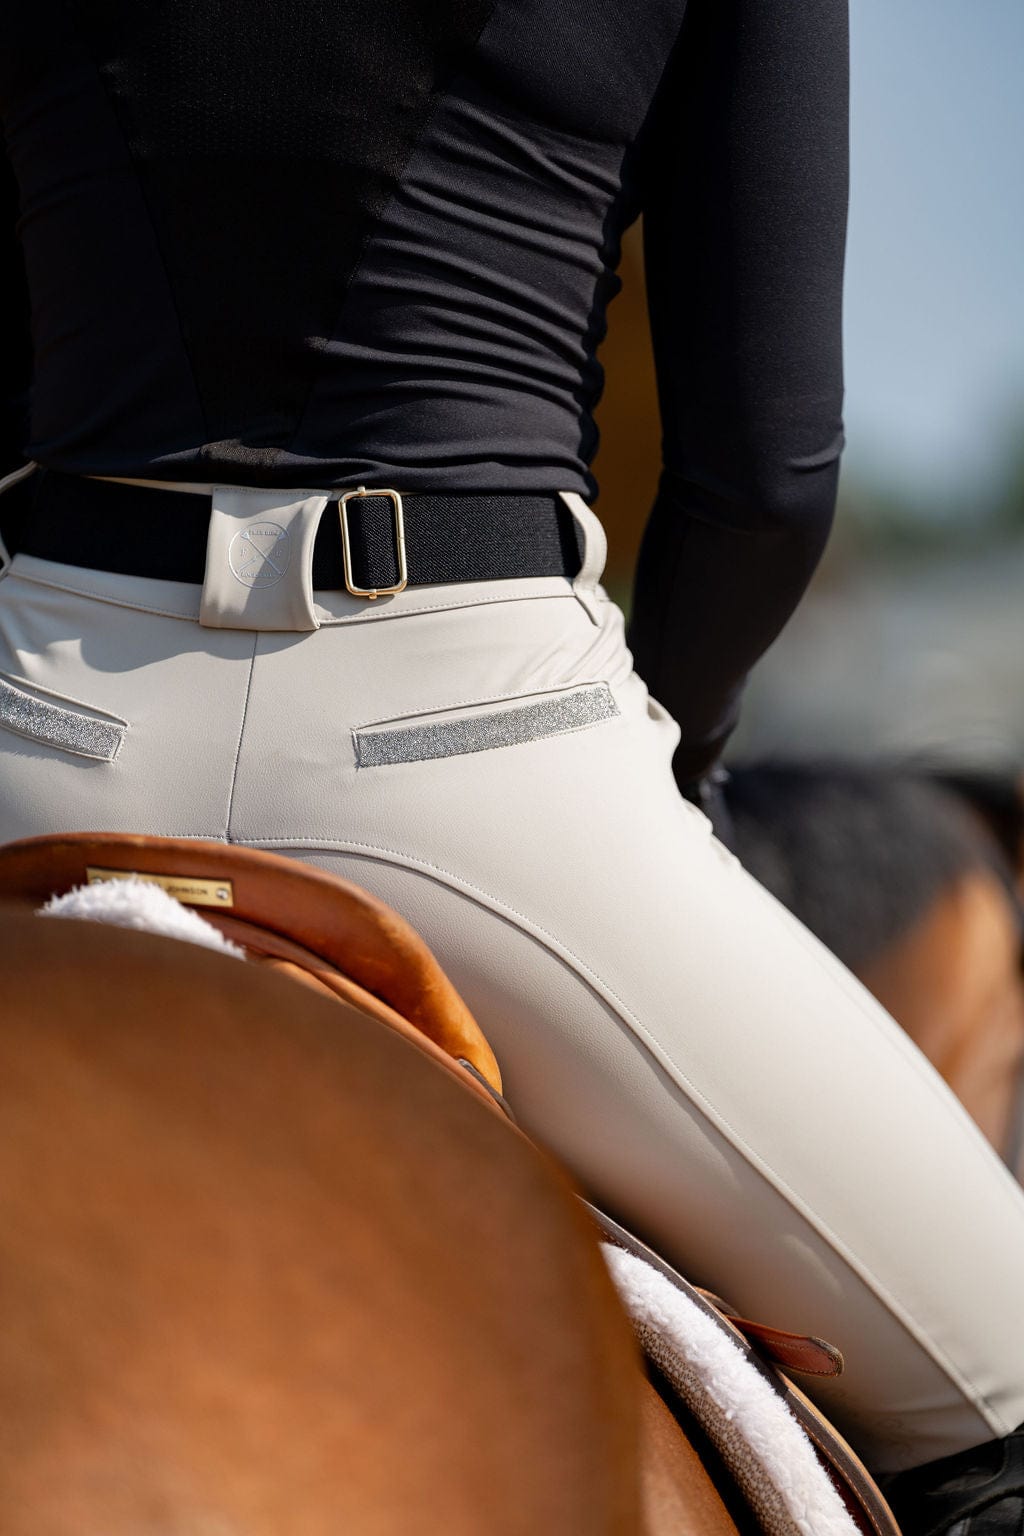 Equestrian clothing brands streamline their workflow with Delogue PLM